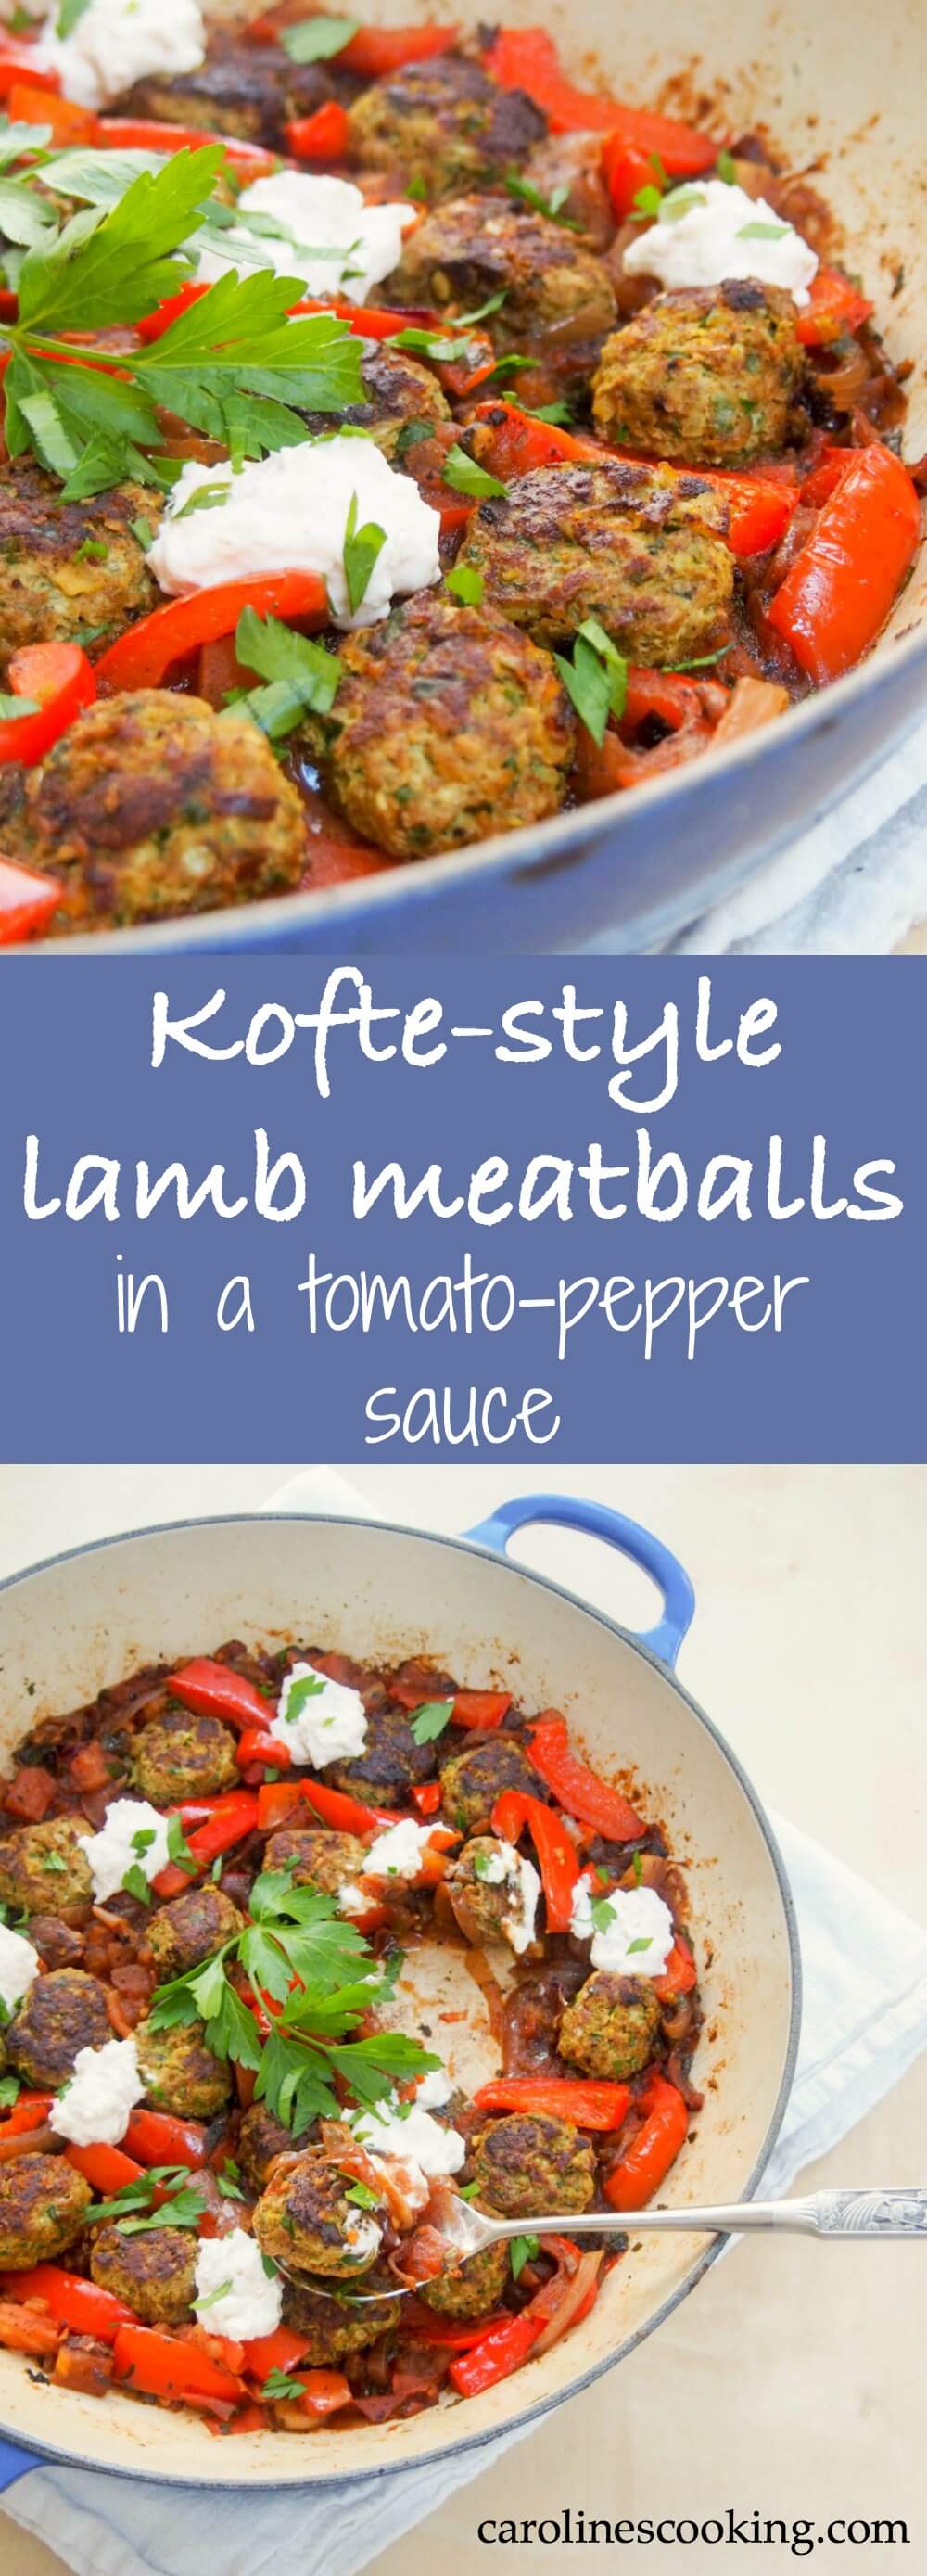 These kofte-style lamb meatballs are filled with delicious herbs, spices & pine nuts, then made better served in a tomato-pepper sauce with a feta-yogurt topping.  They're great for brunch, lunch or dinner.  Tasty comfort food!